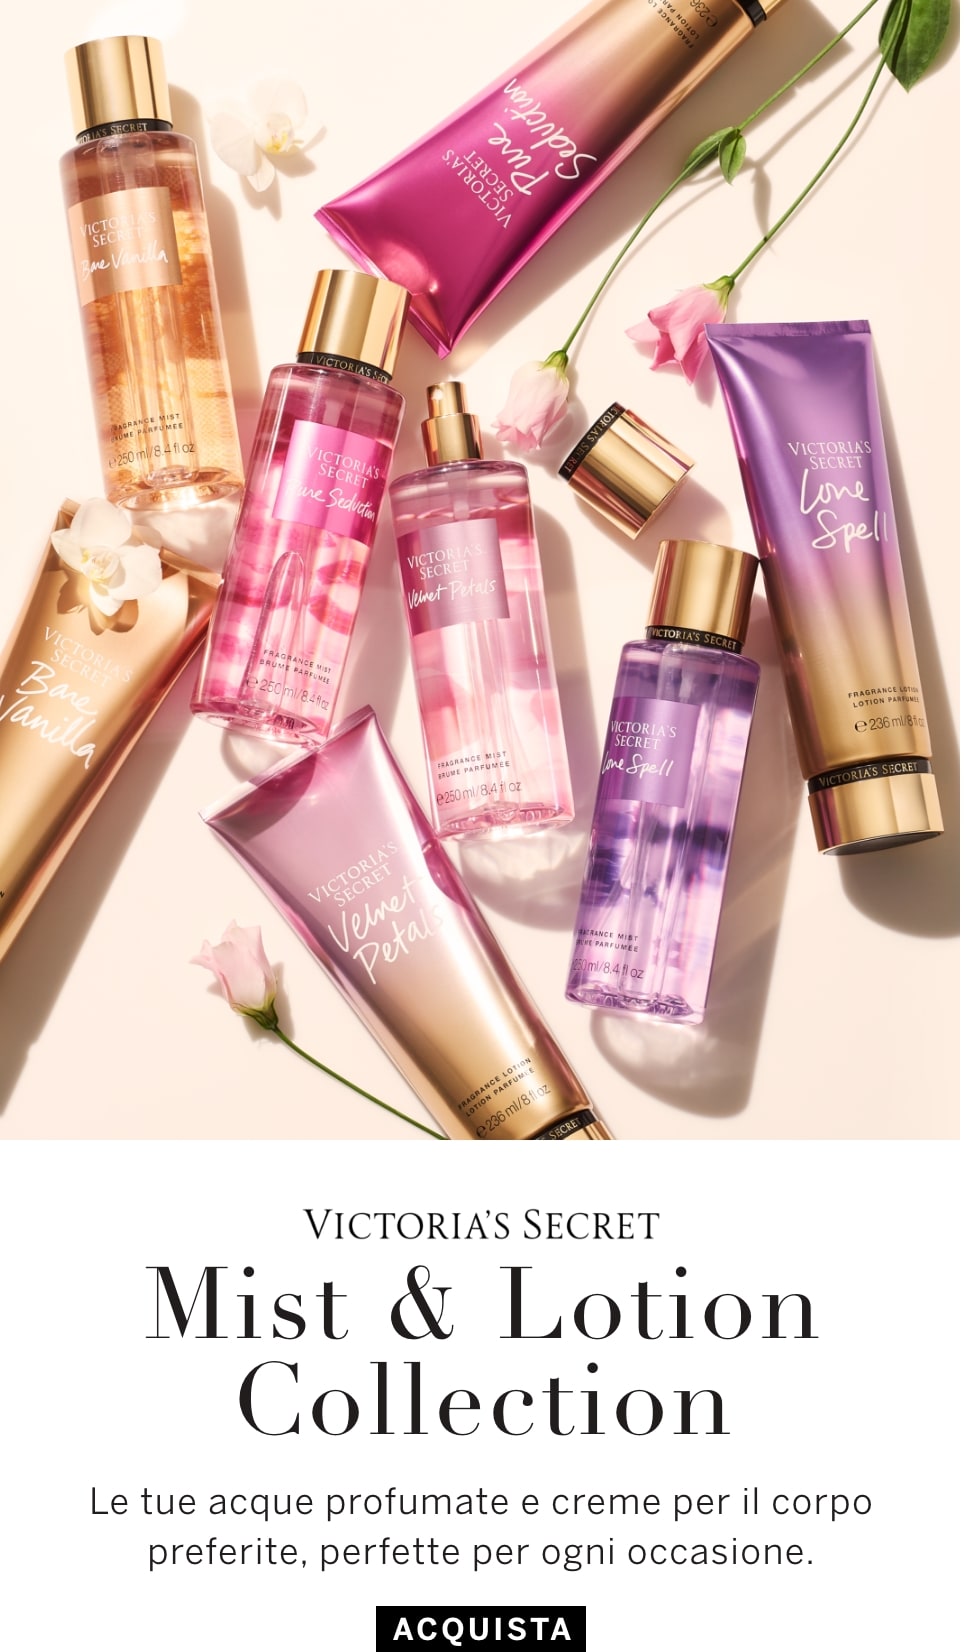 Mist & Lotion Collection